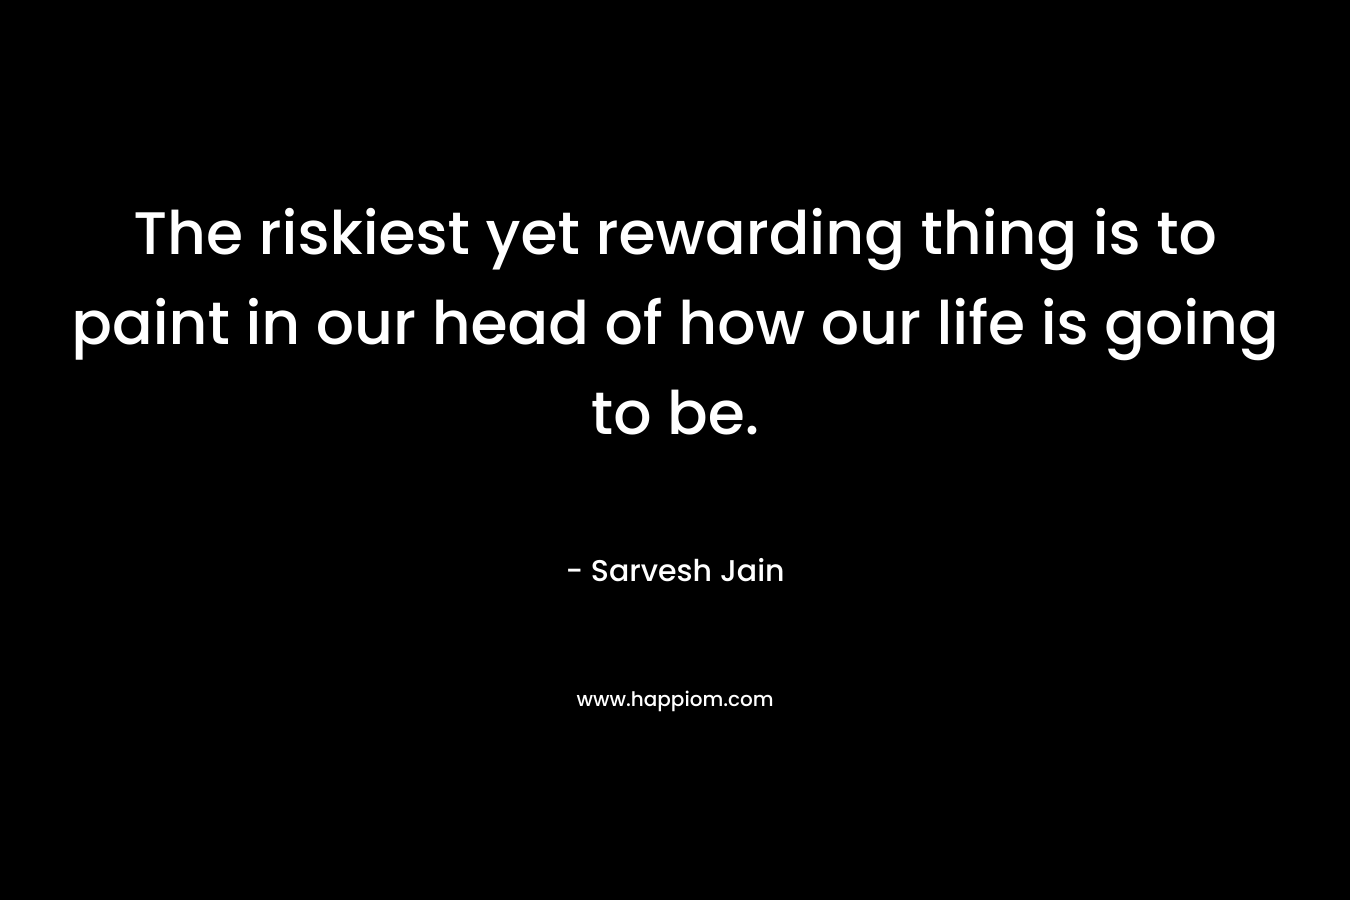 The riskiest yet rewarding thing is to paint in our head of how our life is going to be.